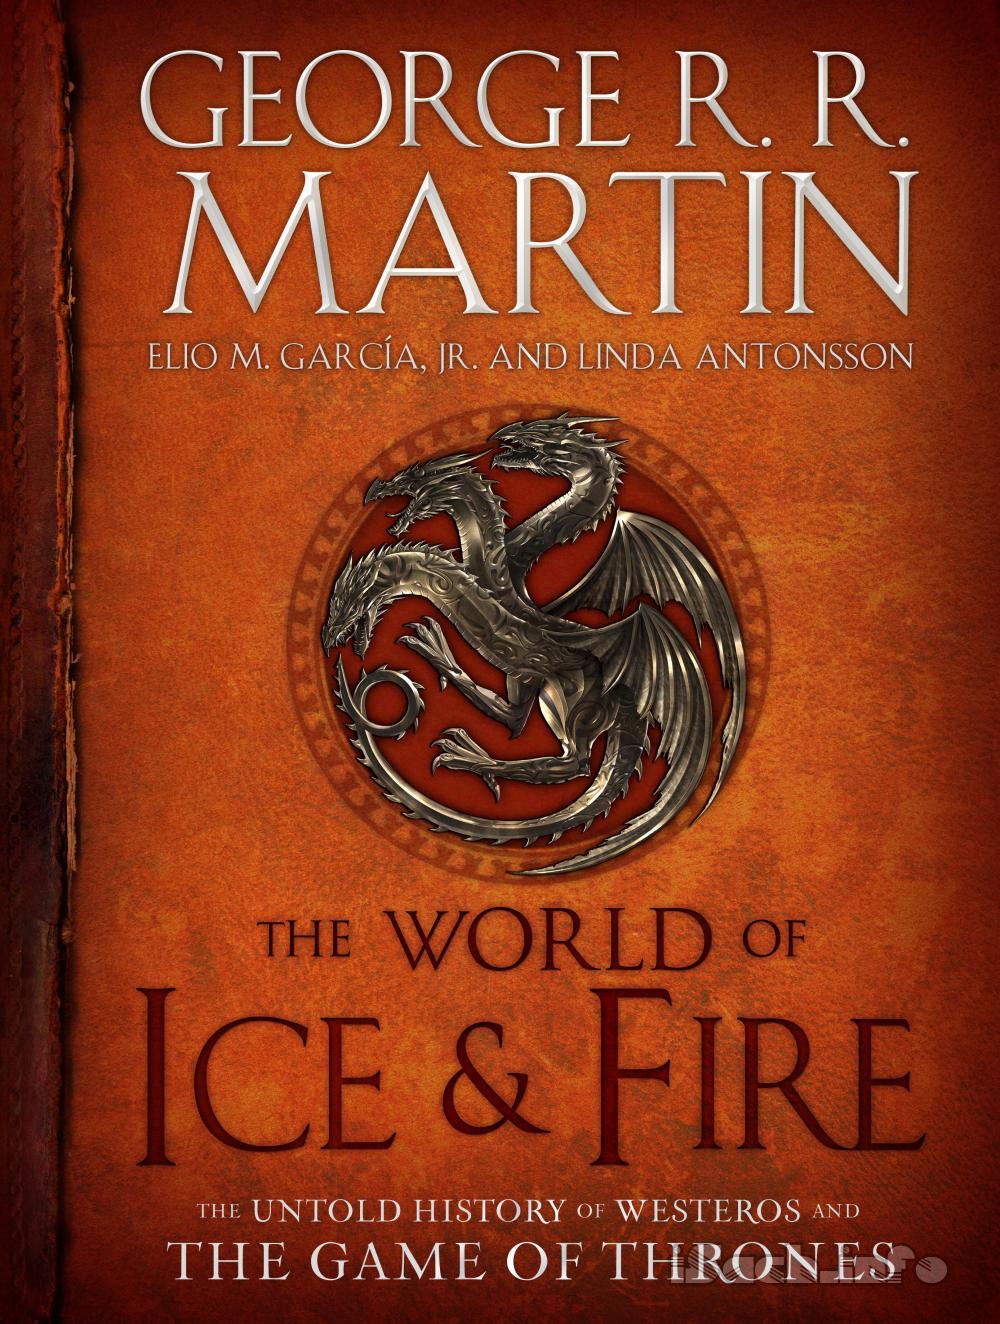 A Song of Ice and Fire #1: A Game of Thrones